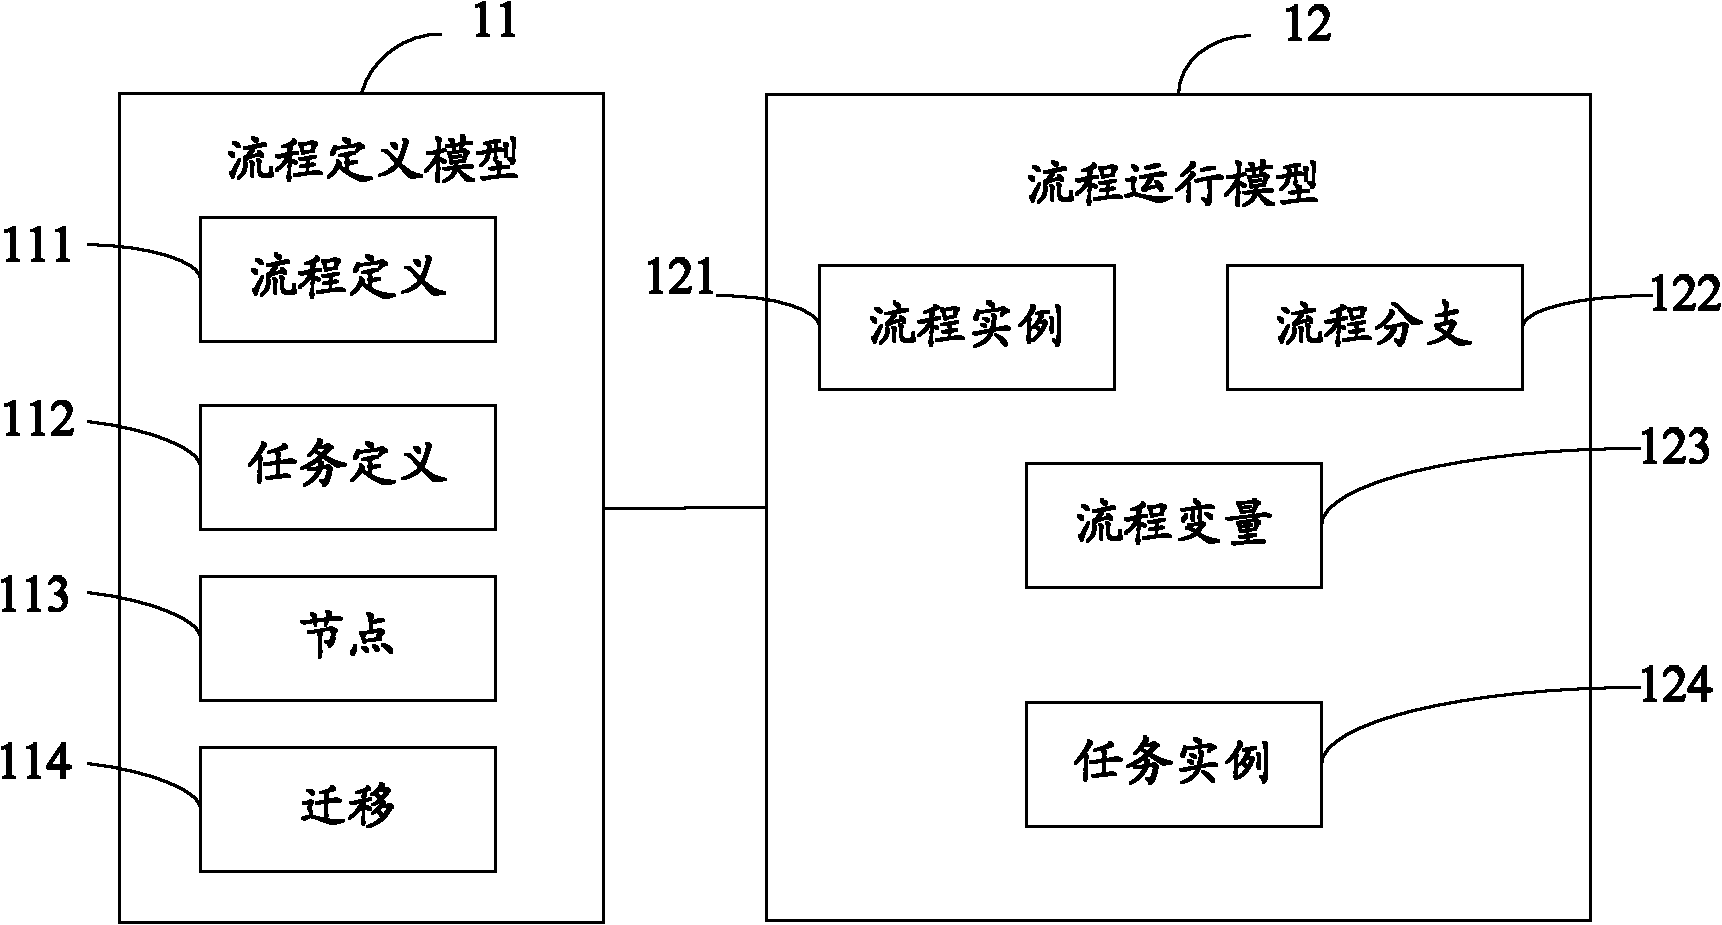 Workflow operation method and system